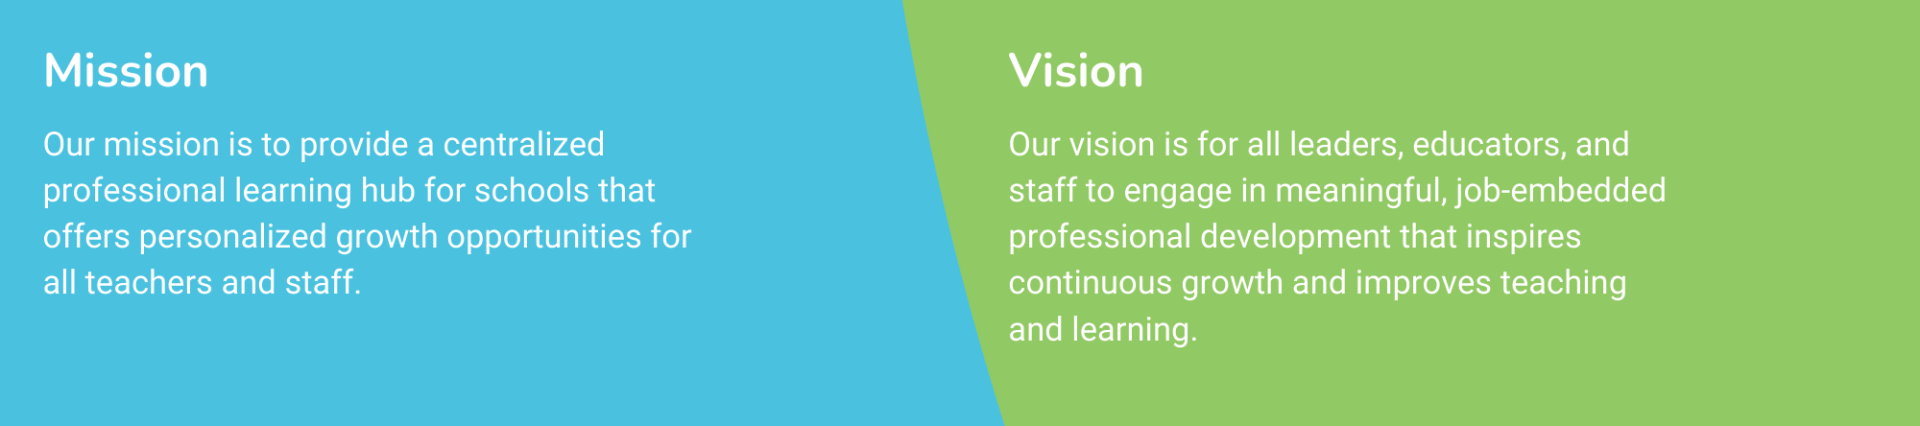 our mission and vision